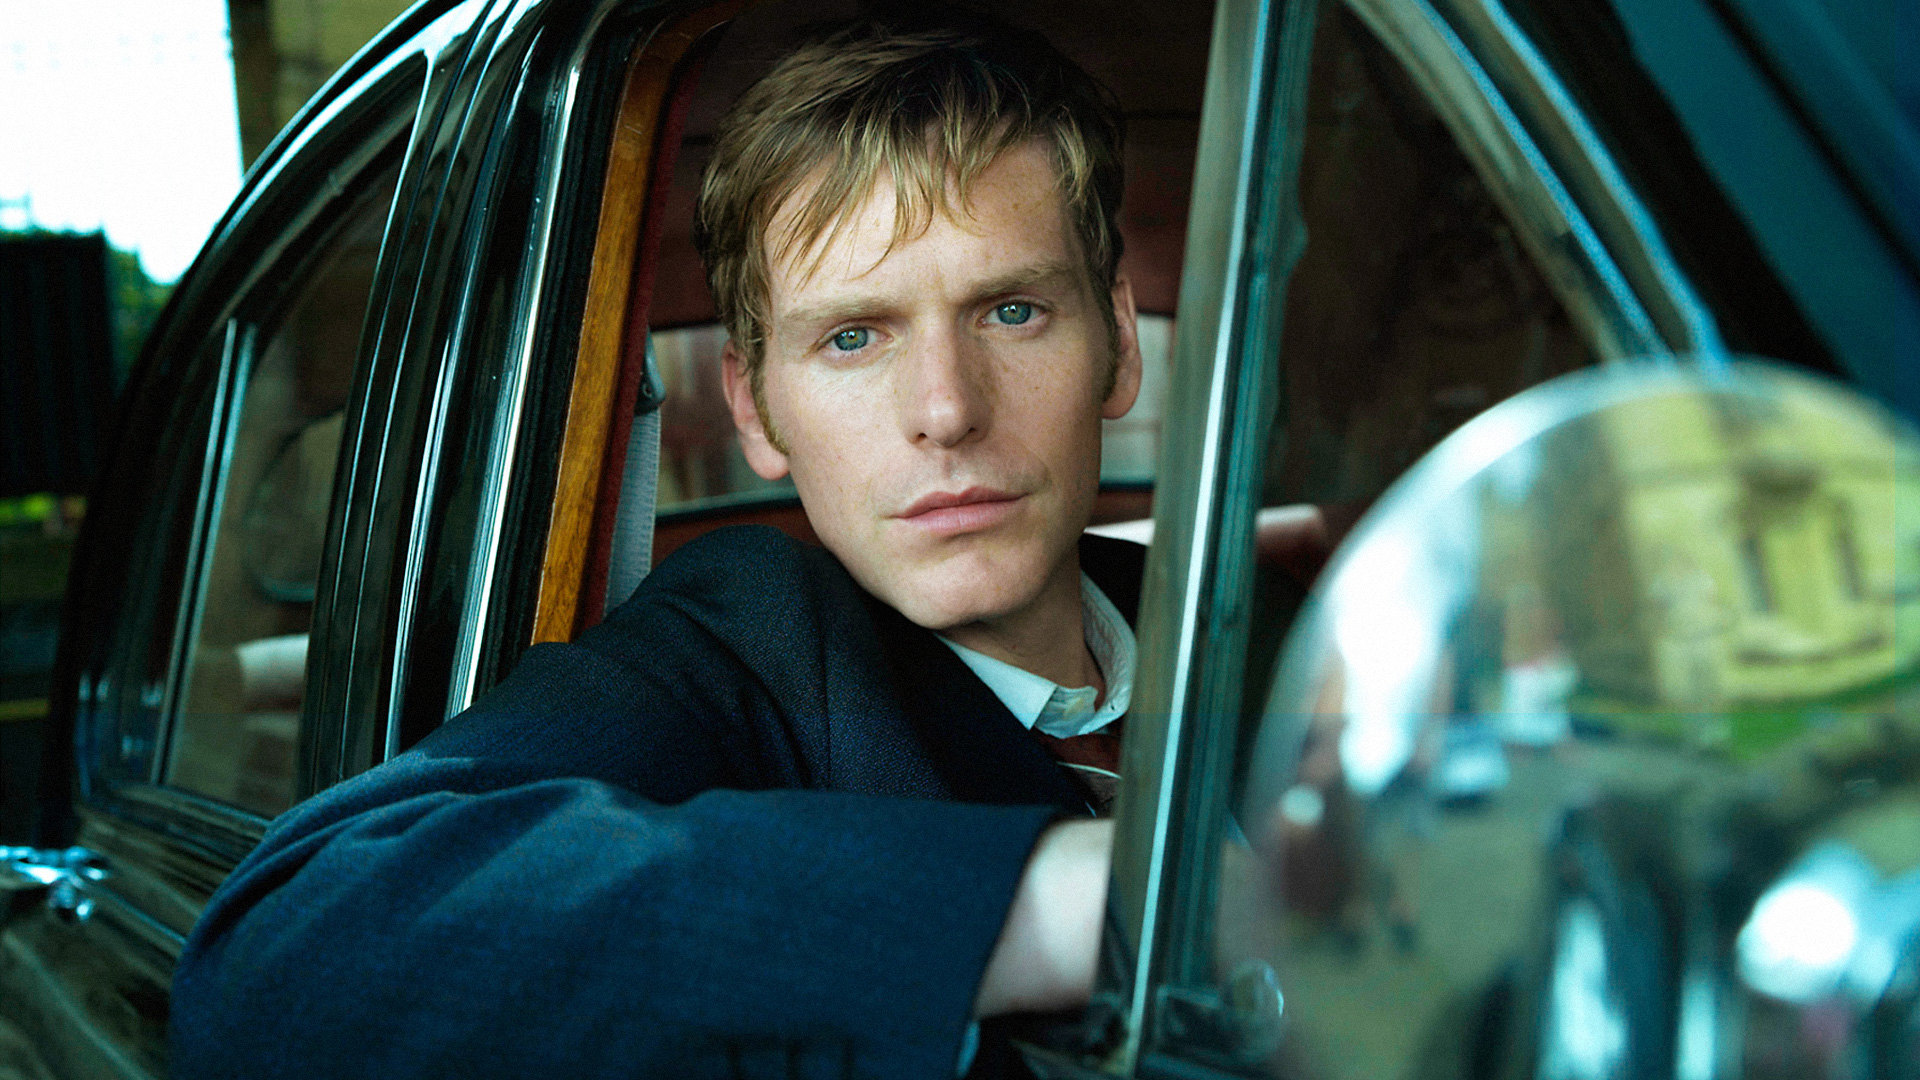 endeavour-countdown-how-many-days-until-the-next-episode